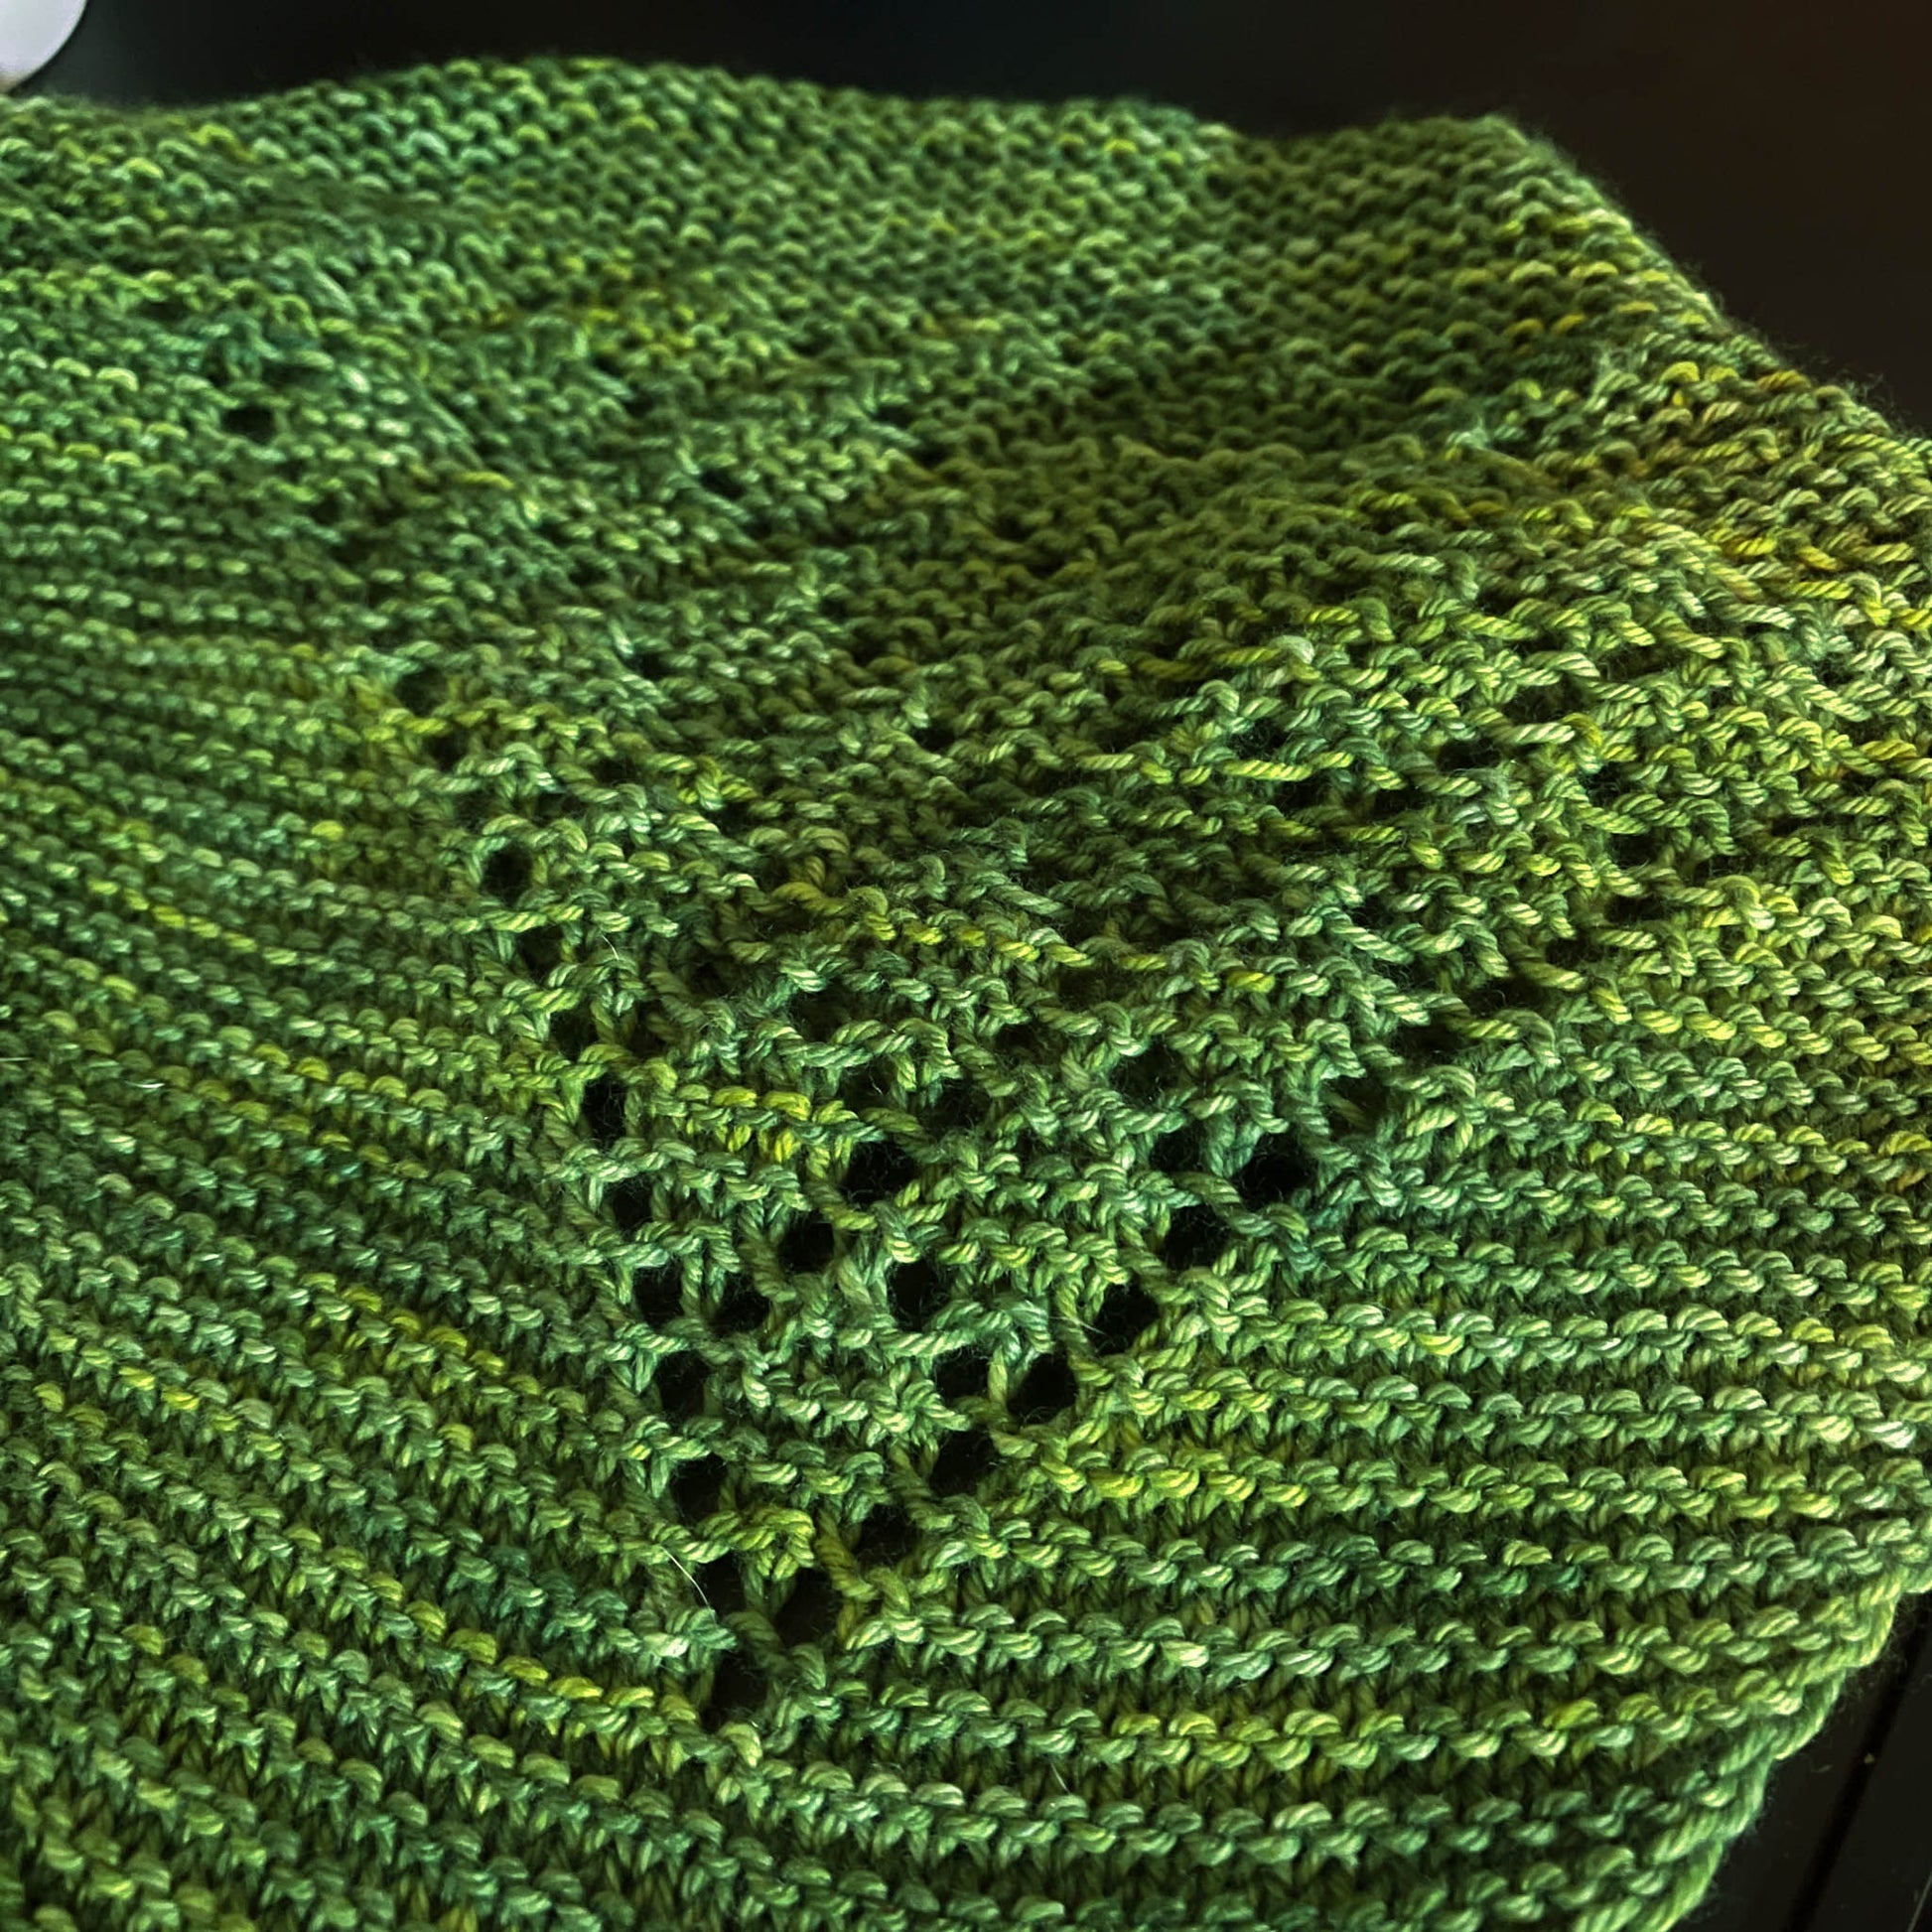 A green knit bandana cowl with lace details.